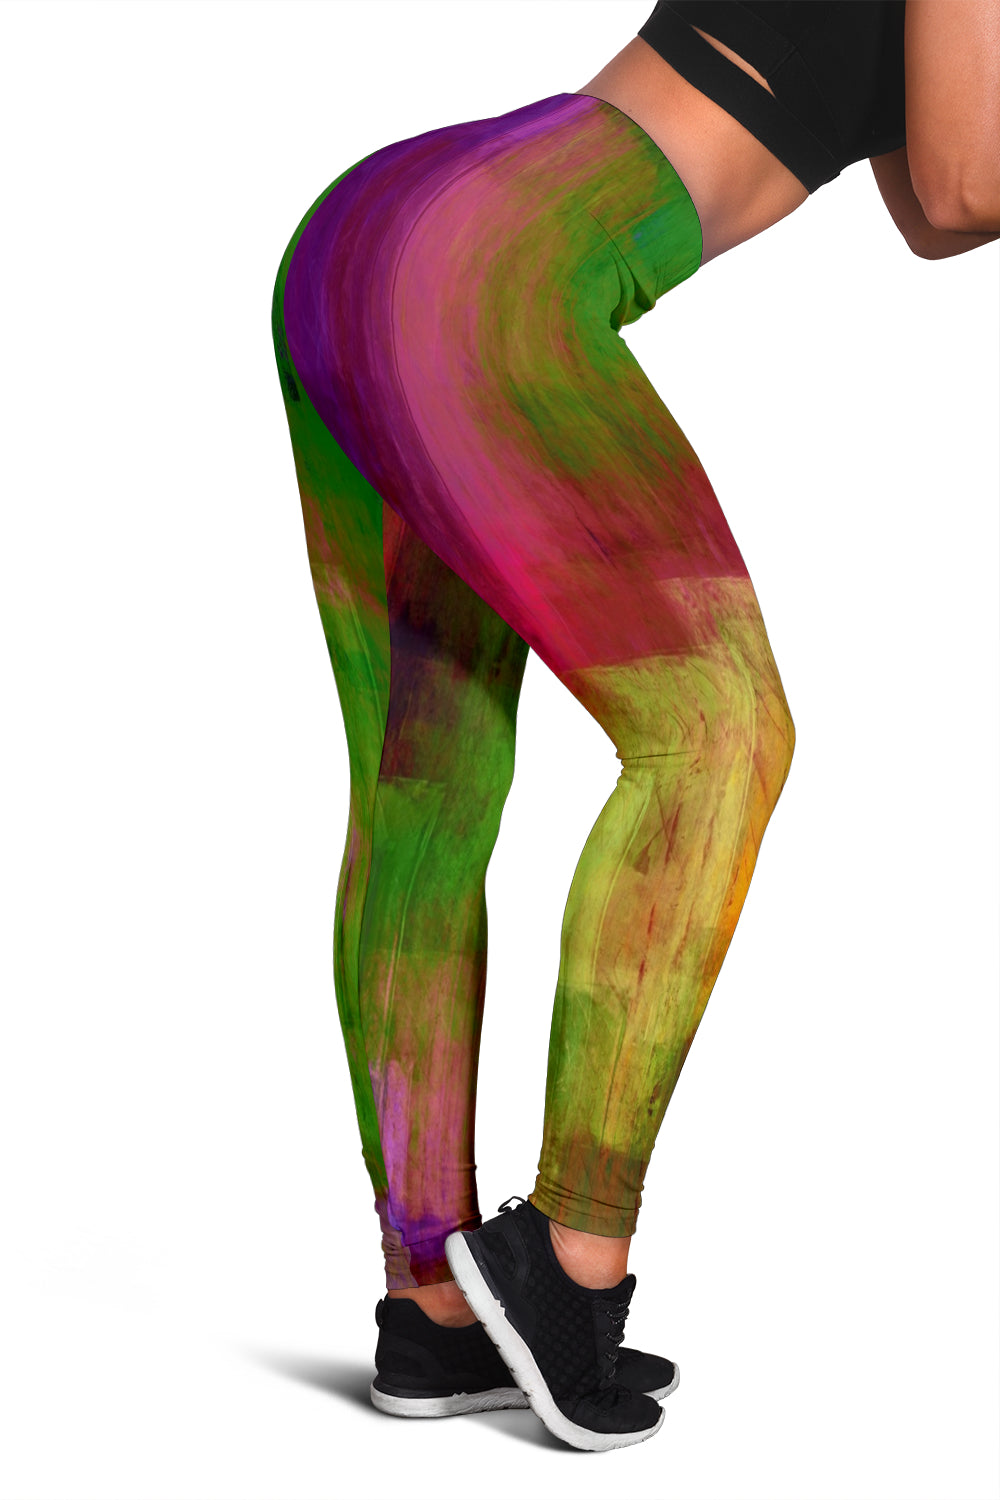 women's leggings with an abstract green design